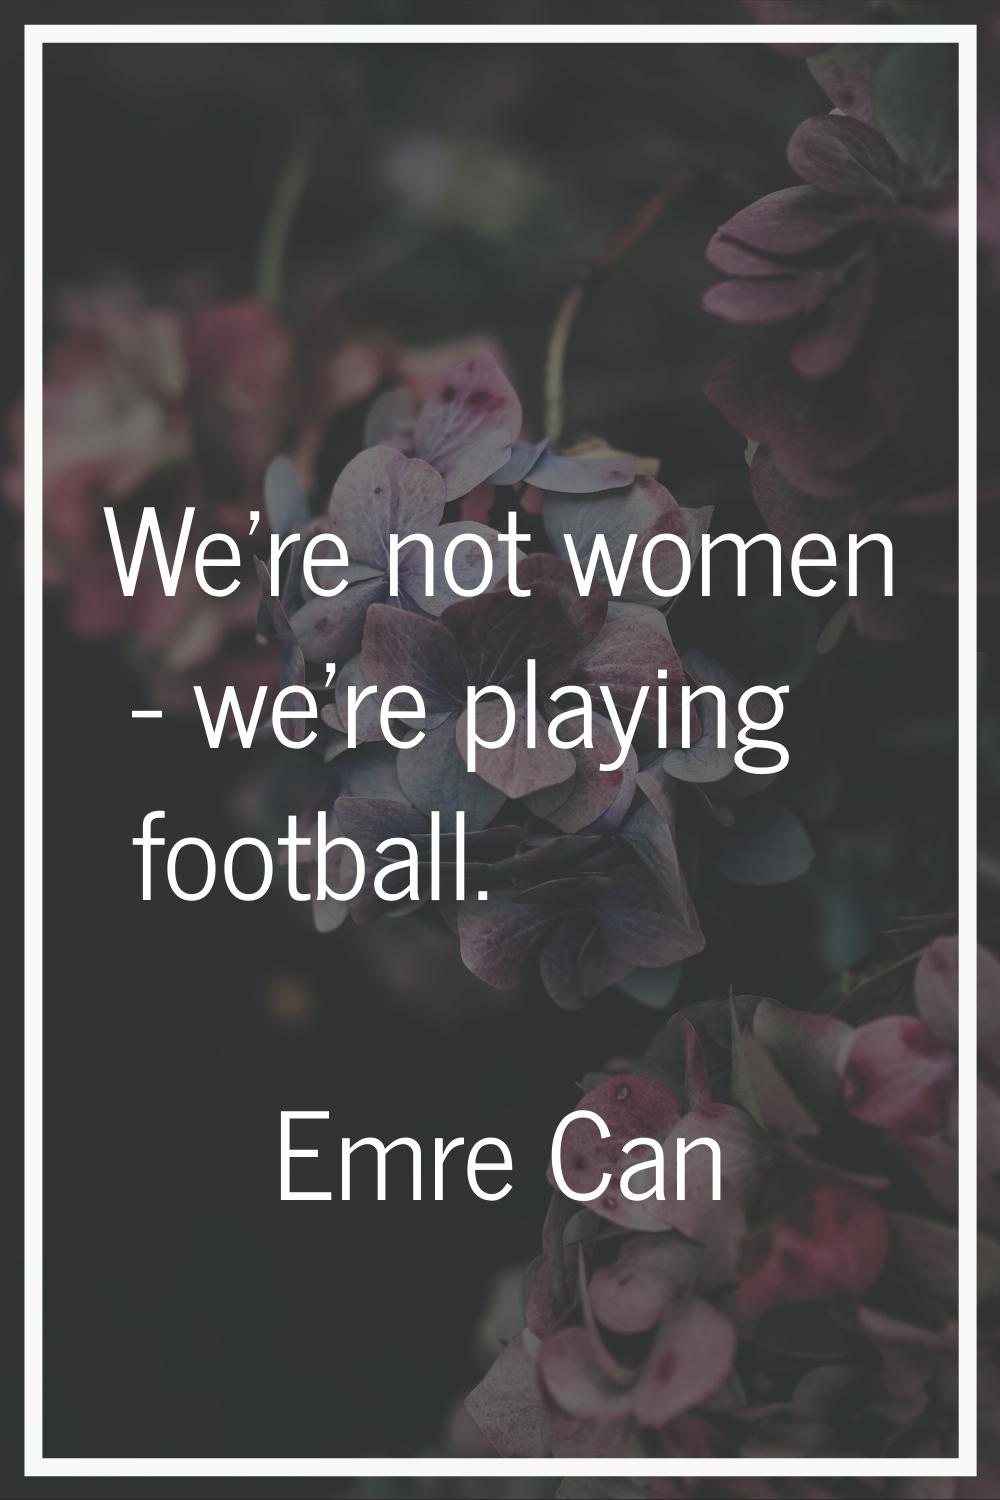 We're not women - we're playing football.